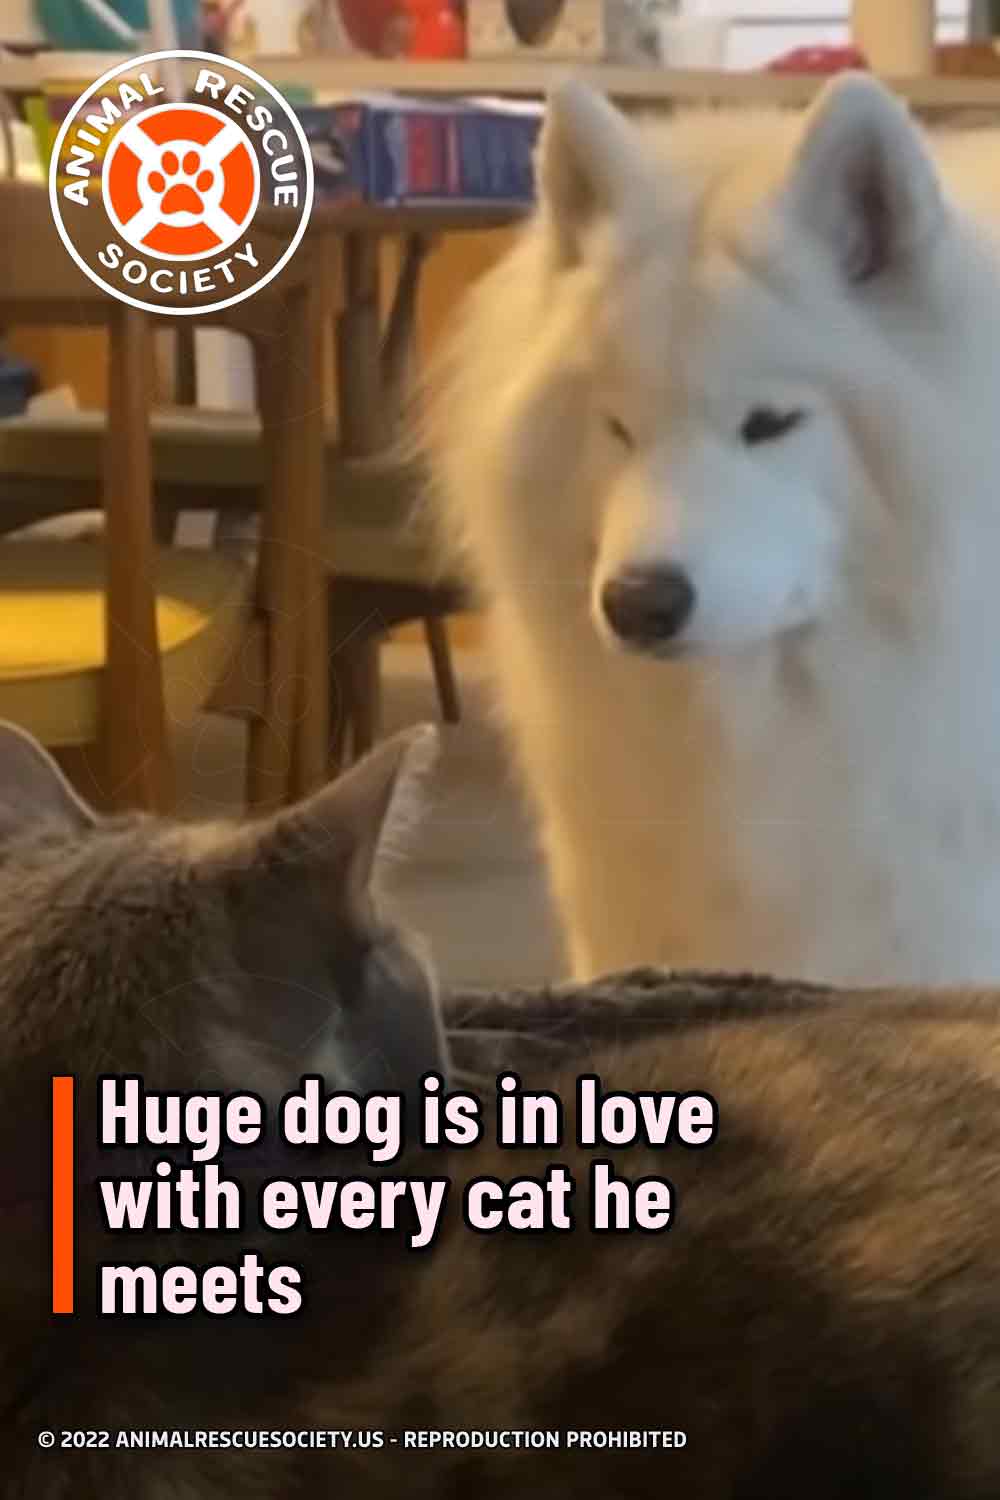 Huge dog is in love with every cat he meets